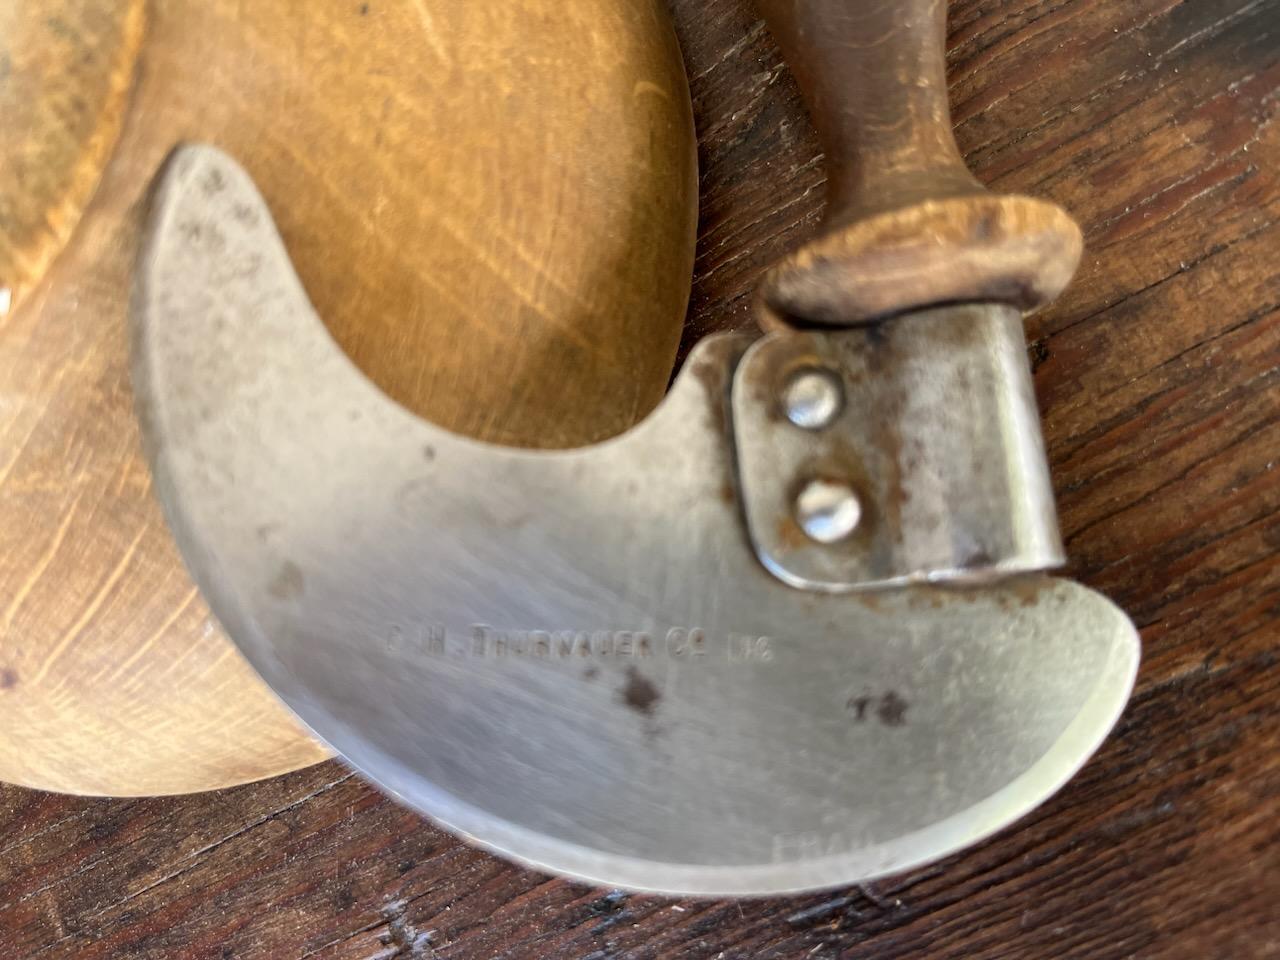 The Thurnauer Company, Inc.This was originally made in France for the American market.This chopper is in working order. Very rare to find with the original hand carved or turned wood bowl.